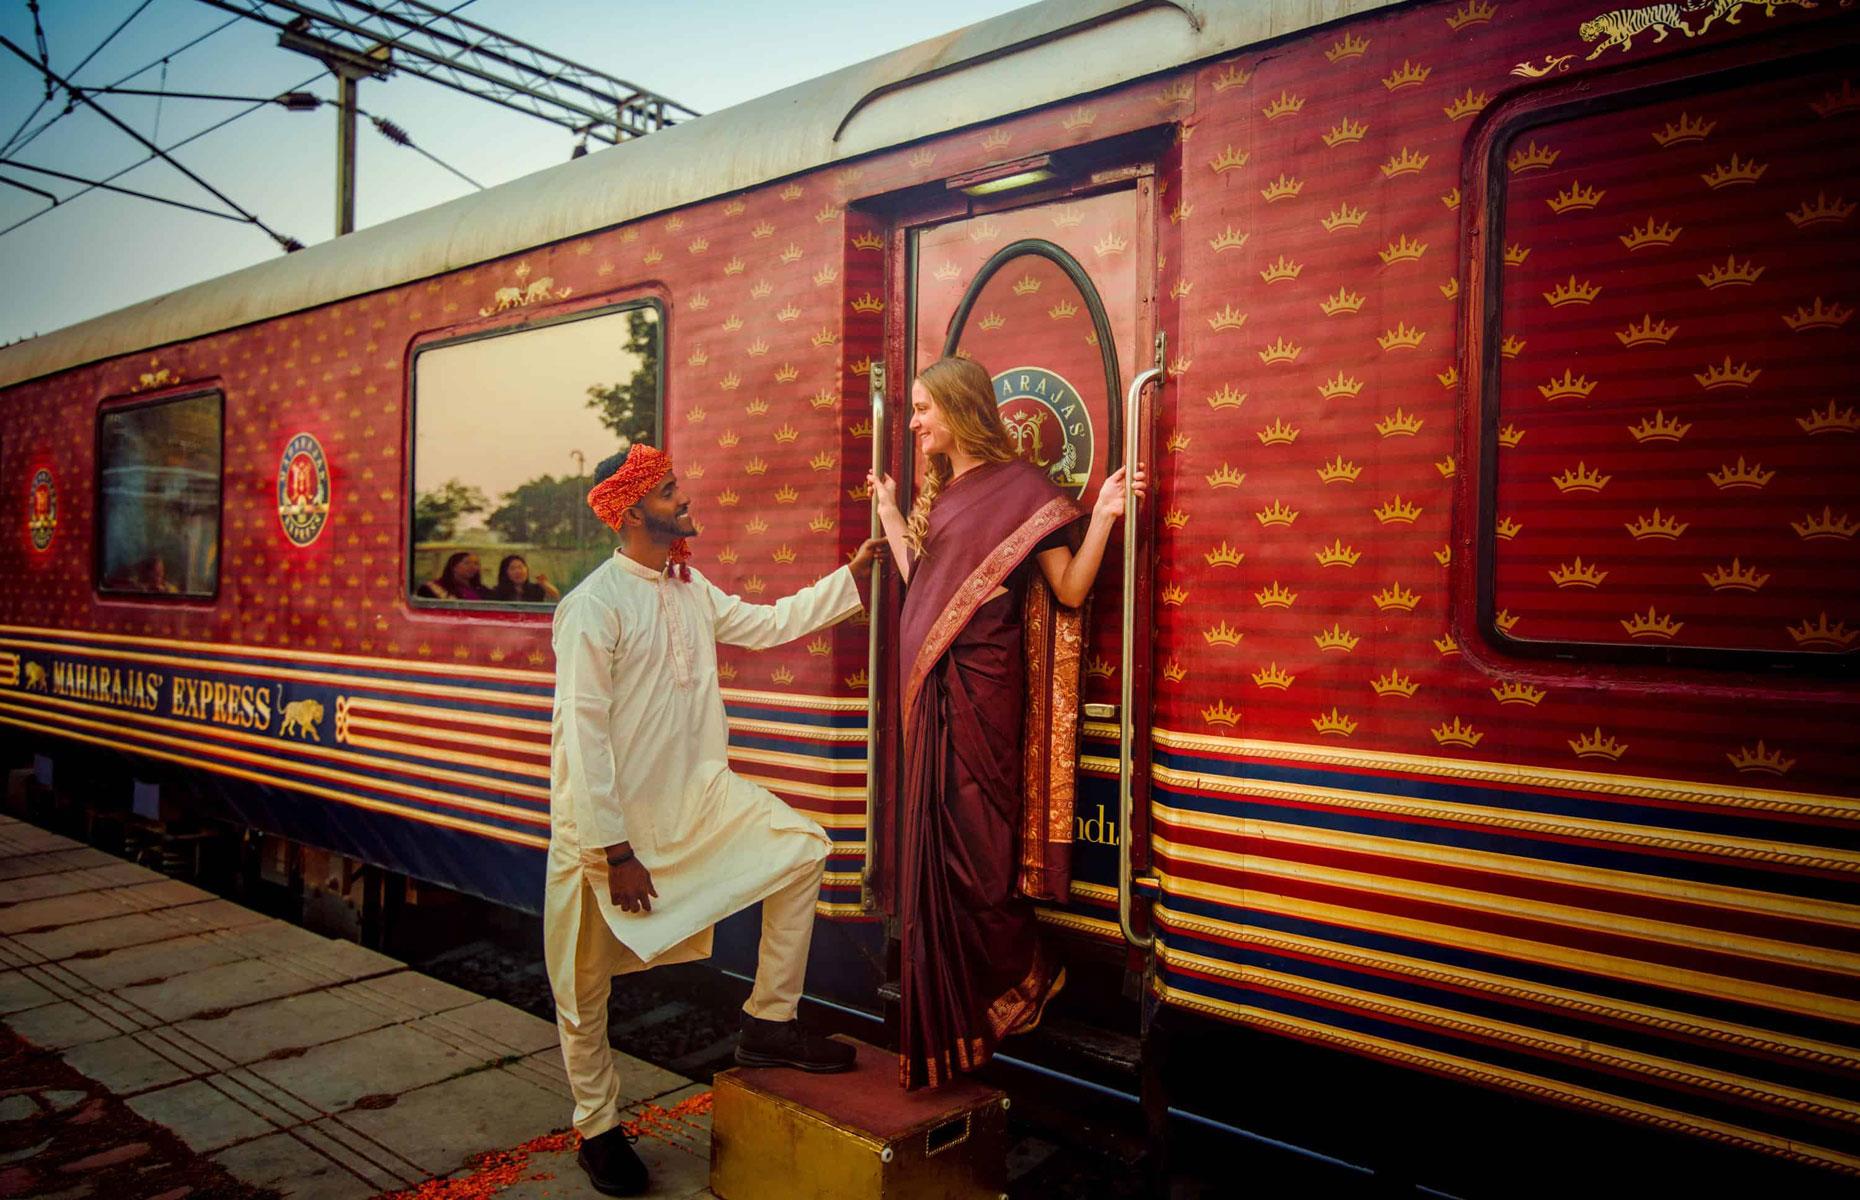 <p>Officially India's most luxurious train, the <em>Maharajahs' Express</em> draws inspiration from the wonderfully ornate private rail carriages of the nation's bygone royalty ("maharajah" is Sanskrit for "great king").</p>  <p>Launched in 2010 by the tourism arm of the state-owned Indian Railways, the regal train operates four captivating itineraries departing from Mumbai or Delhi, including Agra for the Taj Mahal, Jaipur, Mumbai, and various other must-see destinations.</p>